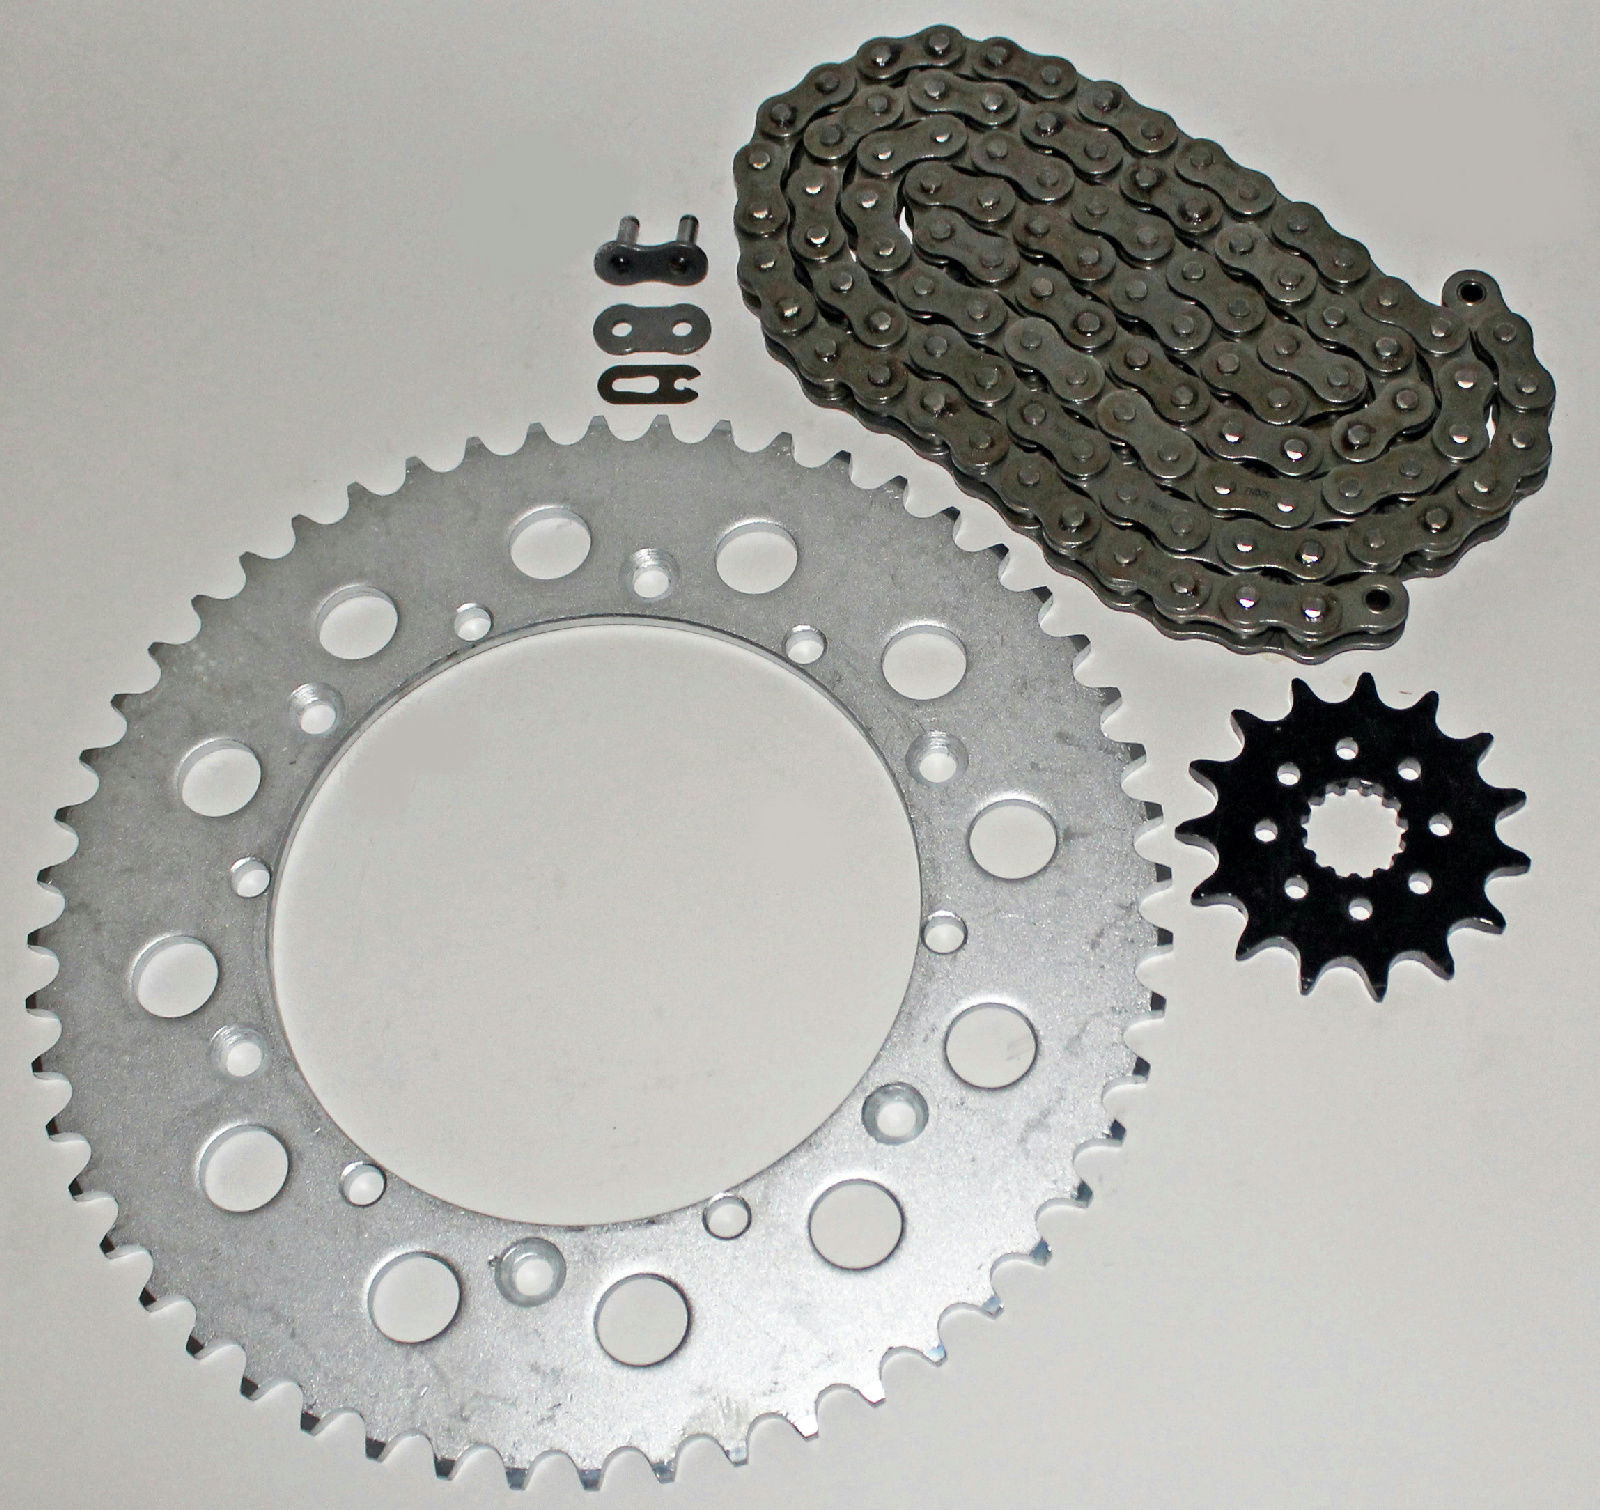 CycleATV Yamaha 1991-1996 WR250 250 / 1987-1990 YZ250 250 Chain And Sprocket 15/50 116L